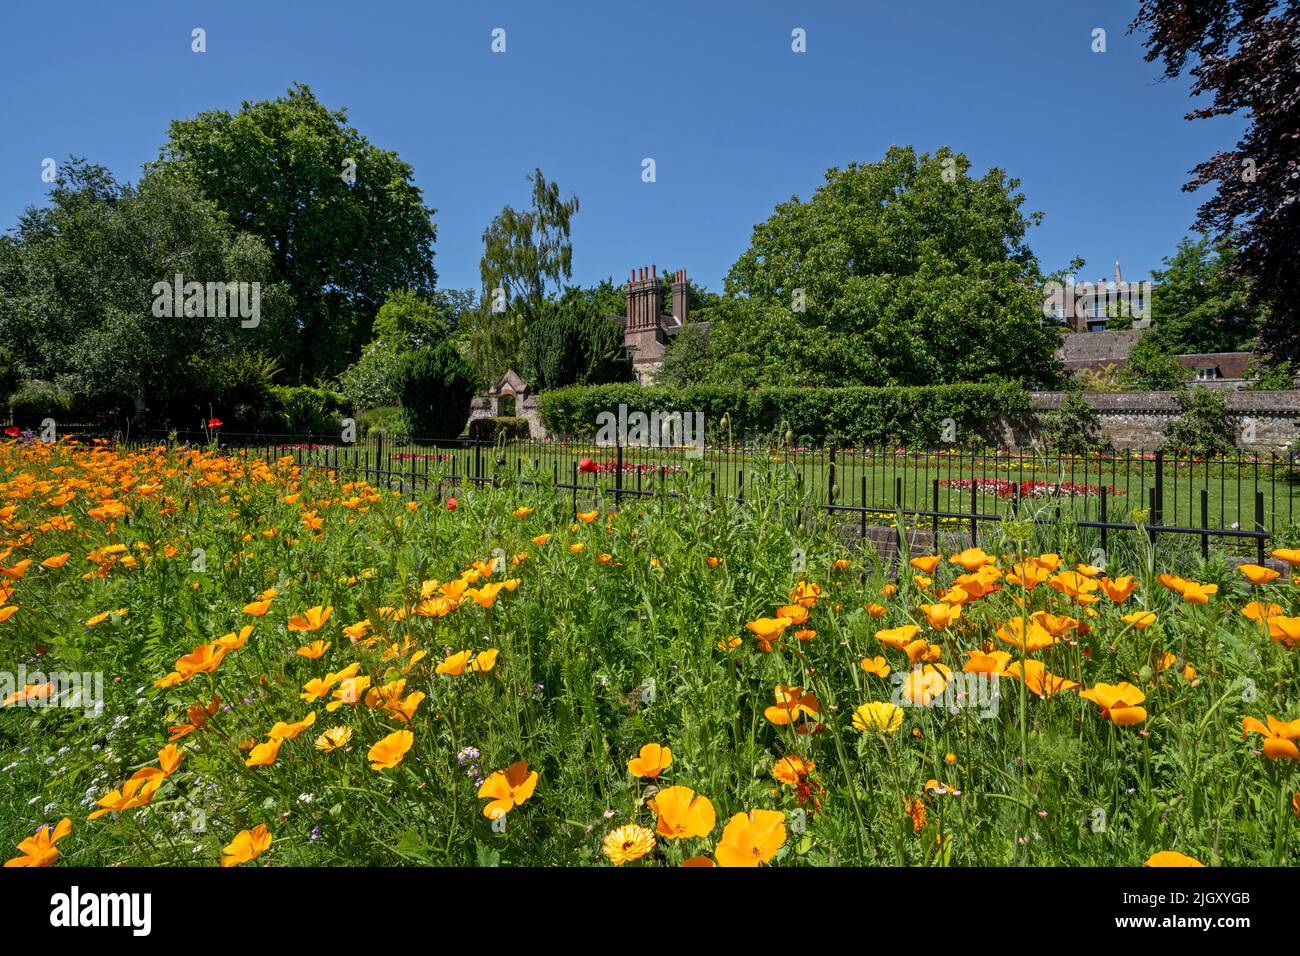 The Flower Gardens and Manor At Southover Grange, Lewes, East Sussex, UK Stock Photo